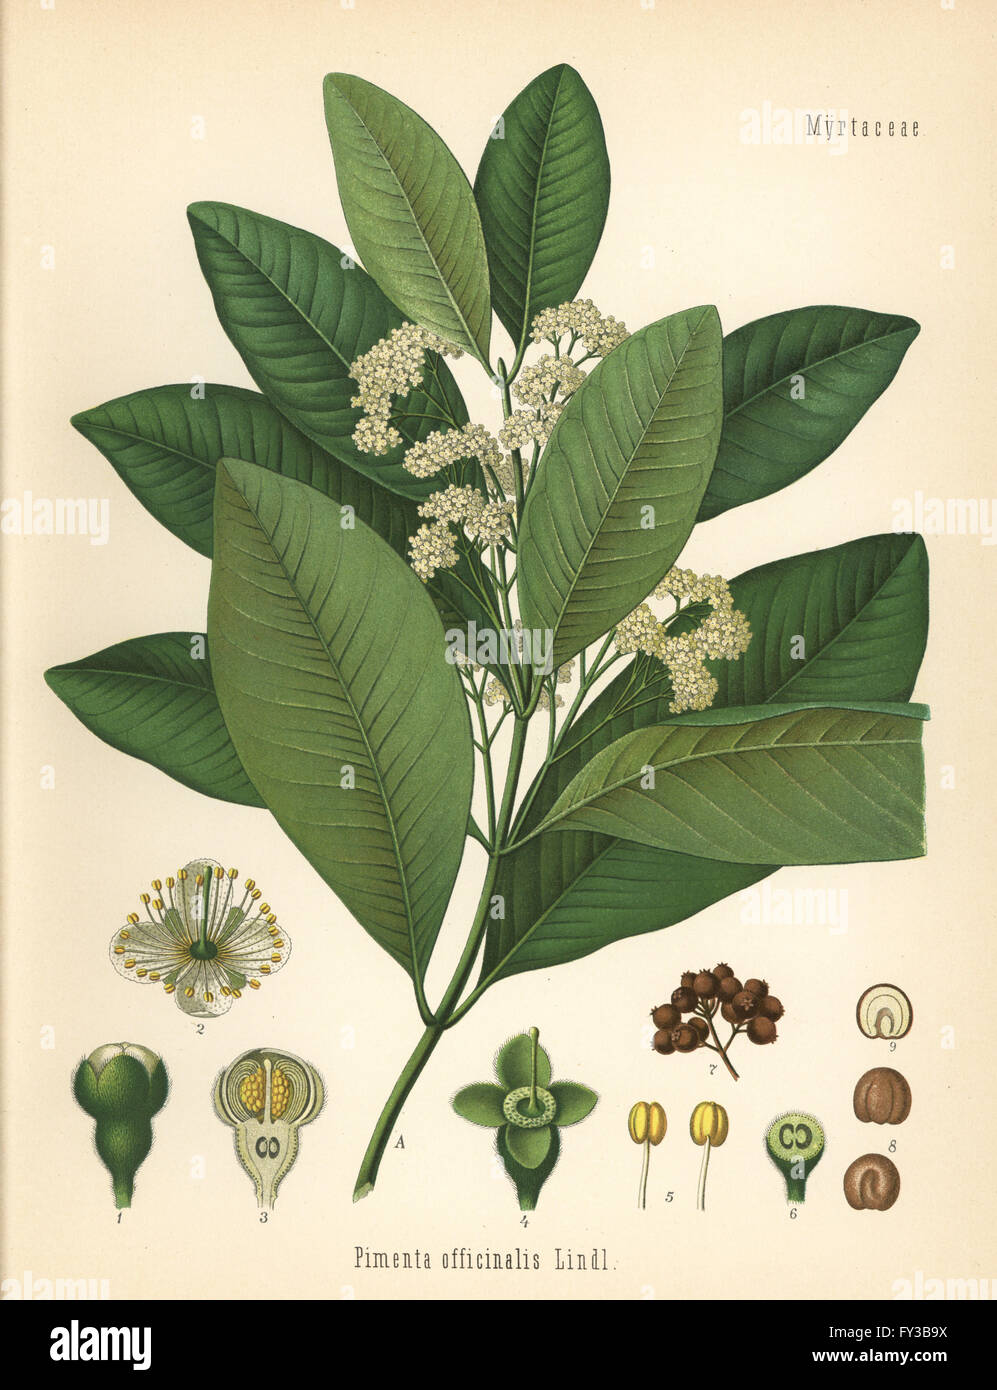 Allspice or Jamaica pepper, Pimenta officinalis. Chromolithograph after a botanical illustration from Hermann Adolph Koehler's Medicinal Plants, edited by Gustav Pabst, Koehler, Germany, 1887. Stock Photo